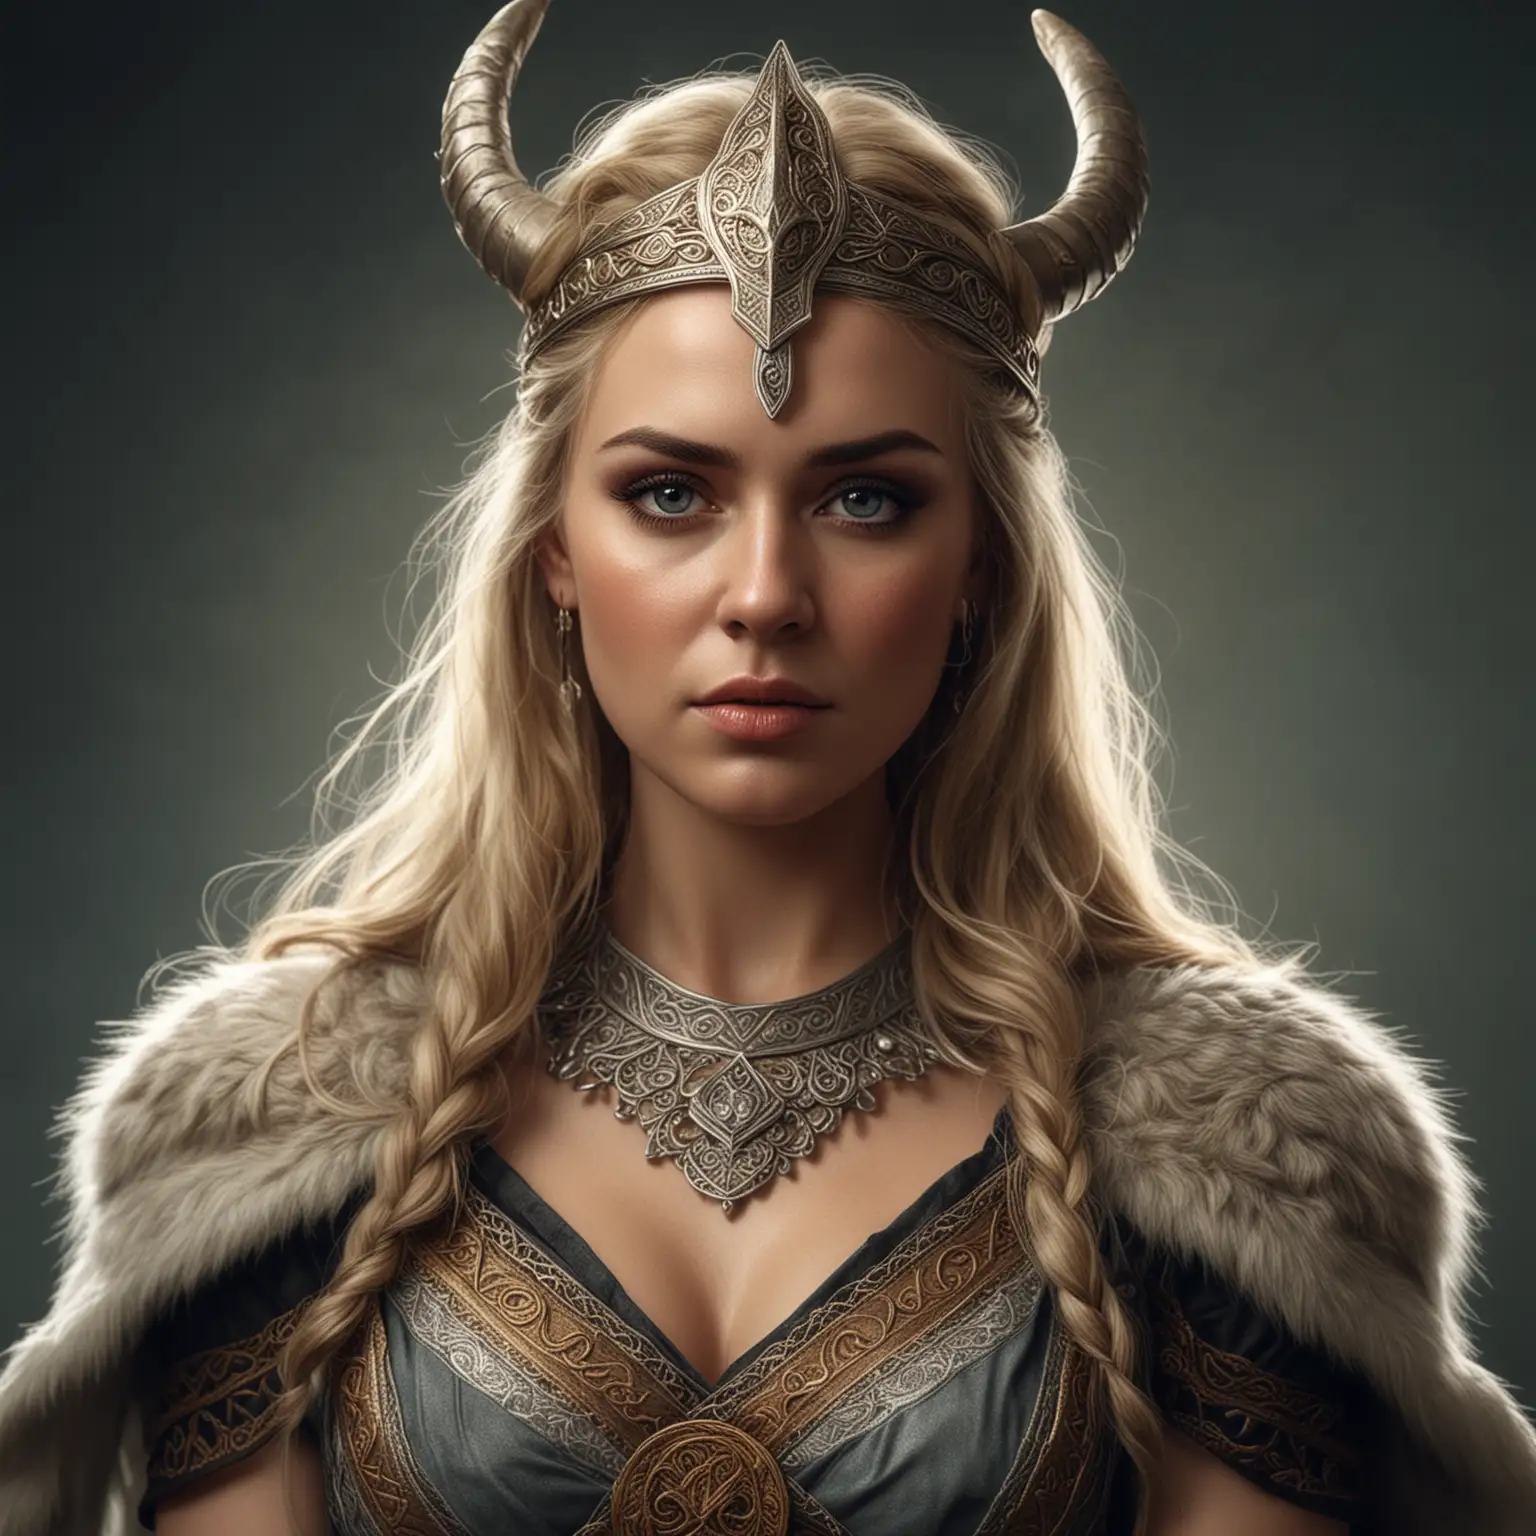 a realistic sexy portrait of frigg a norse mythological woman character. she is wearing a historic dress